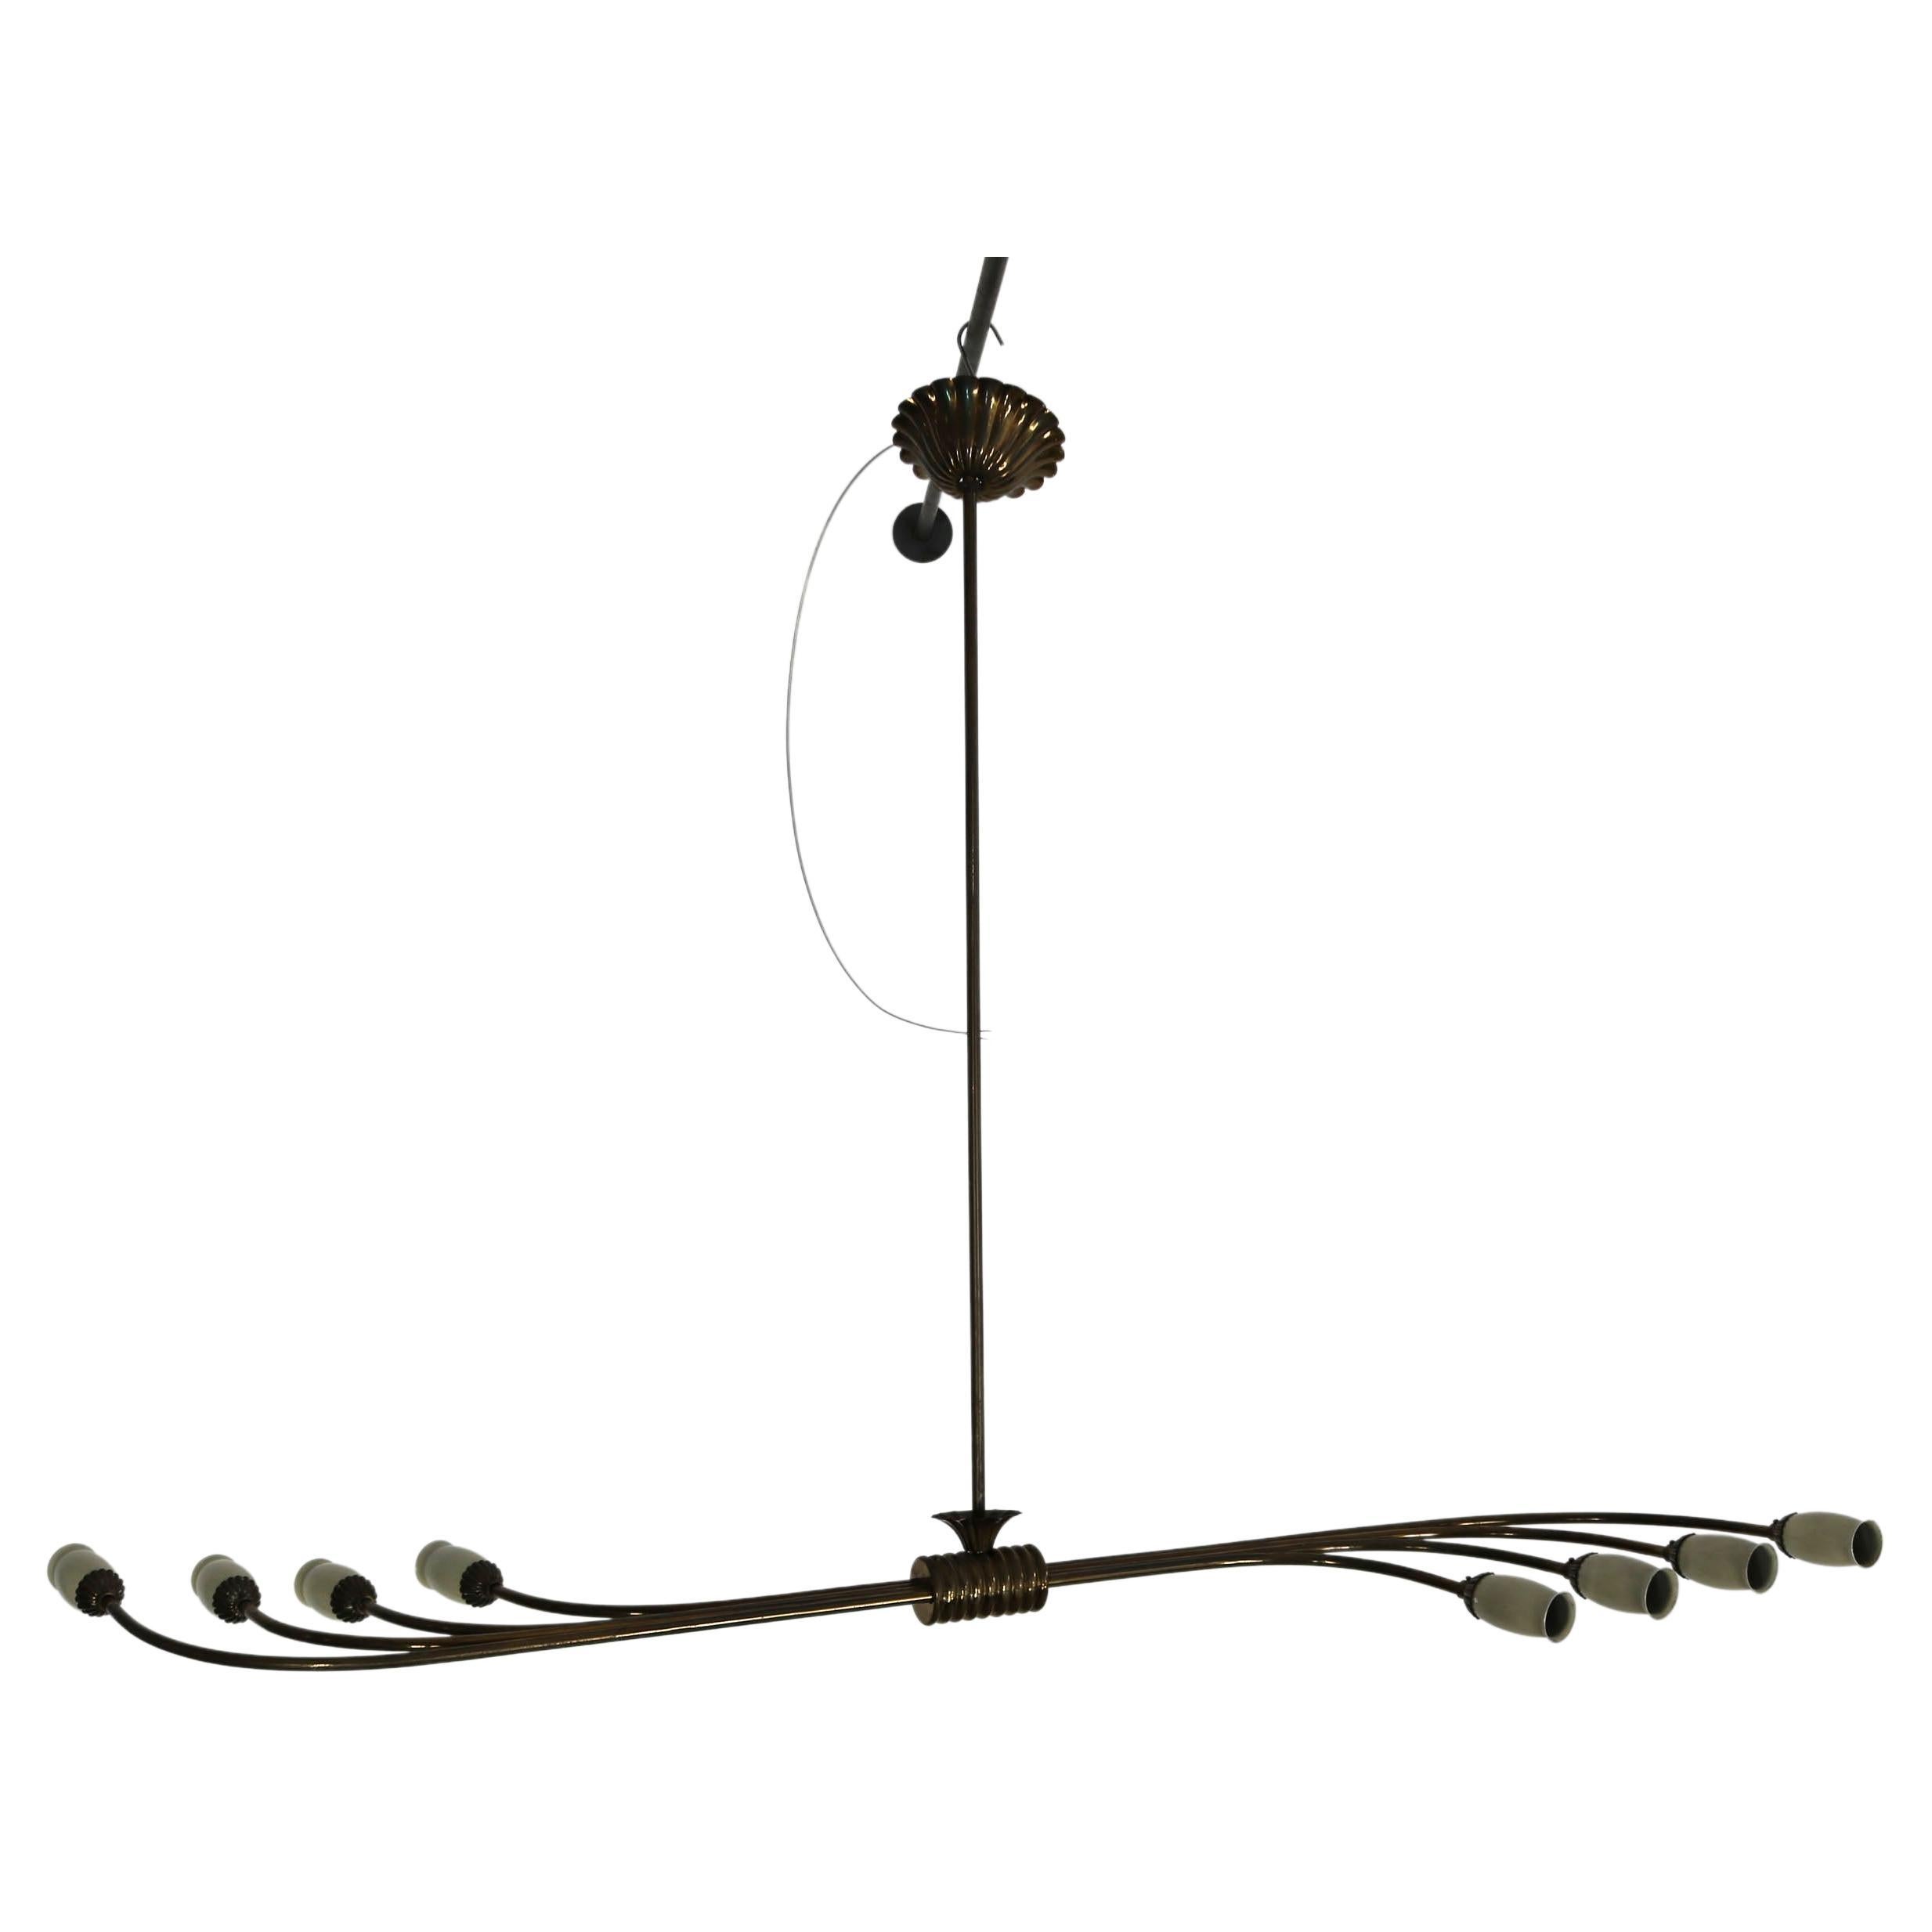 Suspension Lamp with Eight Lights, 1950 from Italy, Brass